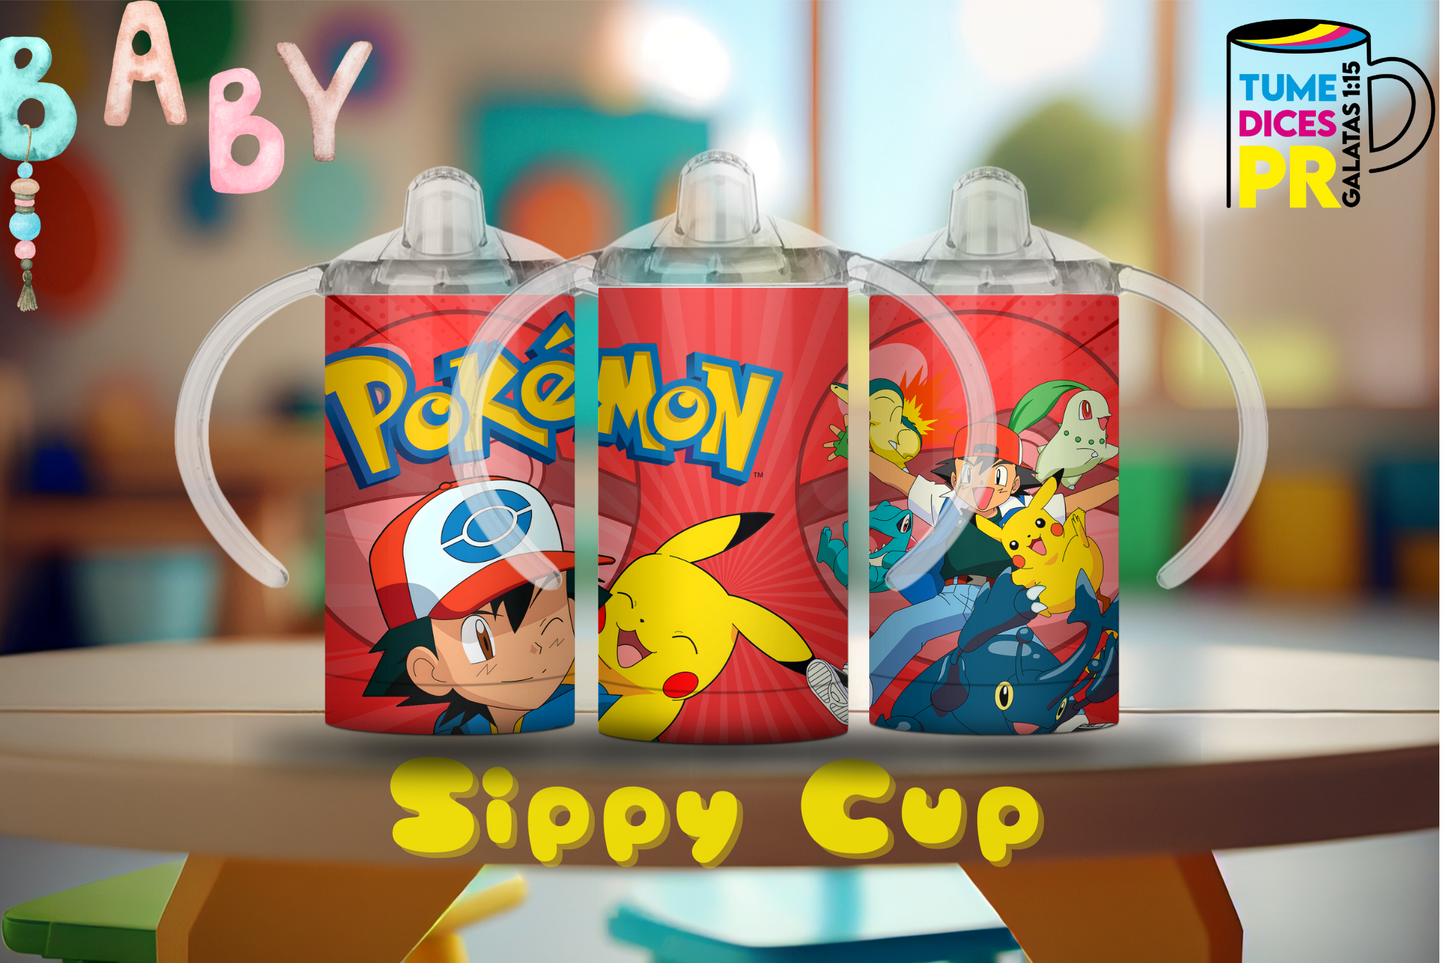 Sippy Cup 3